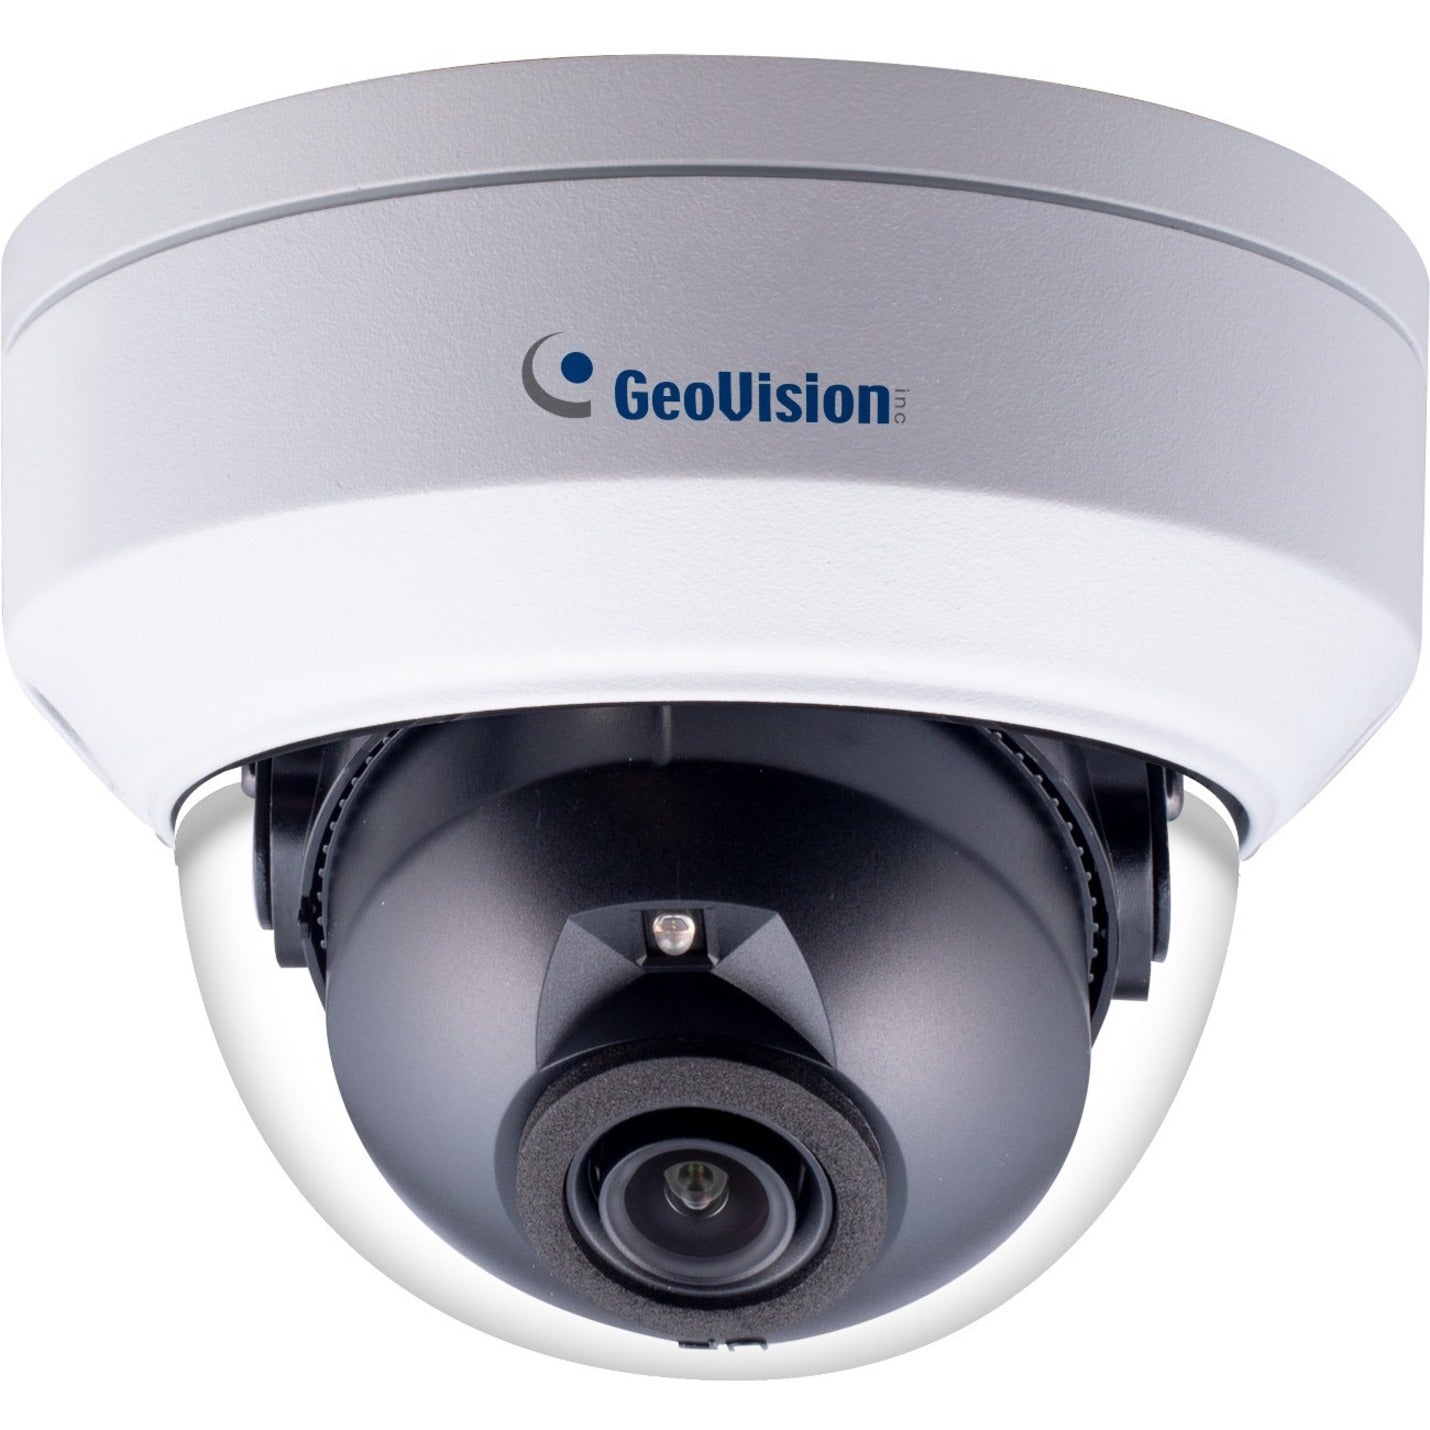 GeoVision 125-TDR2704-002 2MP H.265 Low Lux WDR Pro IR Mini Fixed Rugged IP Dome, Outdoor, 113° Field of View, Full HD Recording